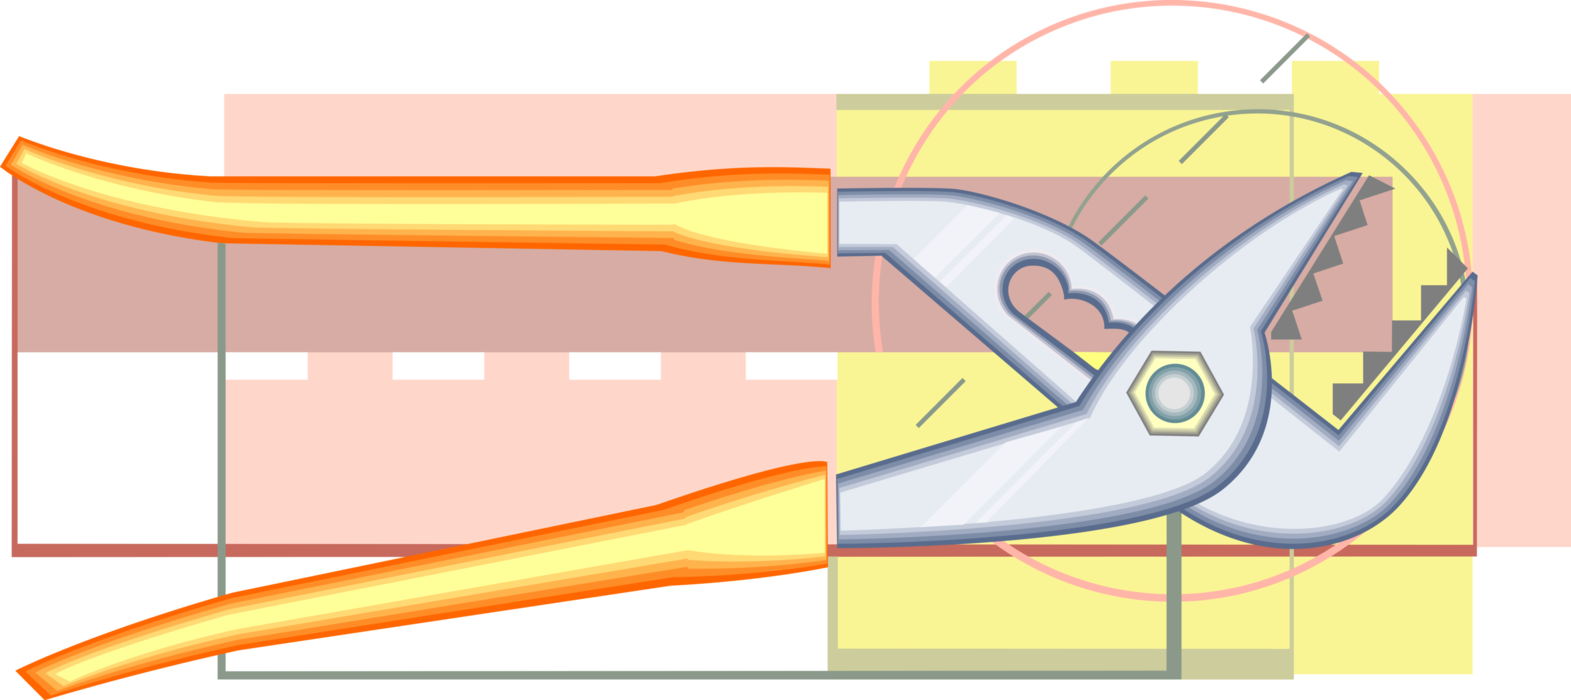 Vector Illustration of Adjustable Wrench or Spanner Tool with Adjustable "Jaw" Width